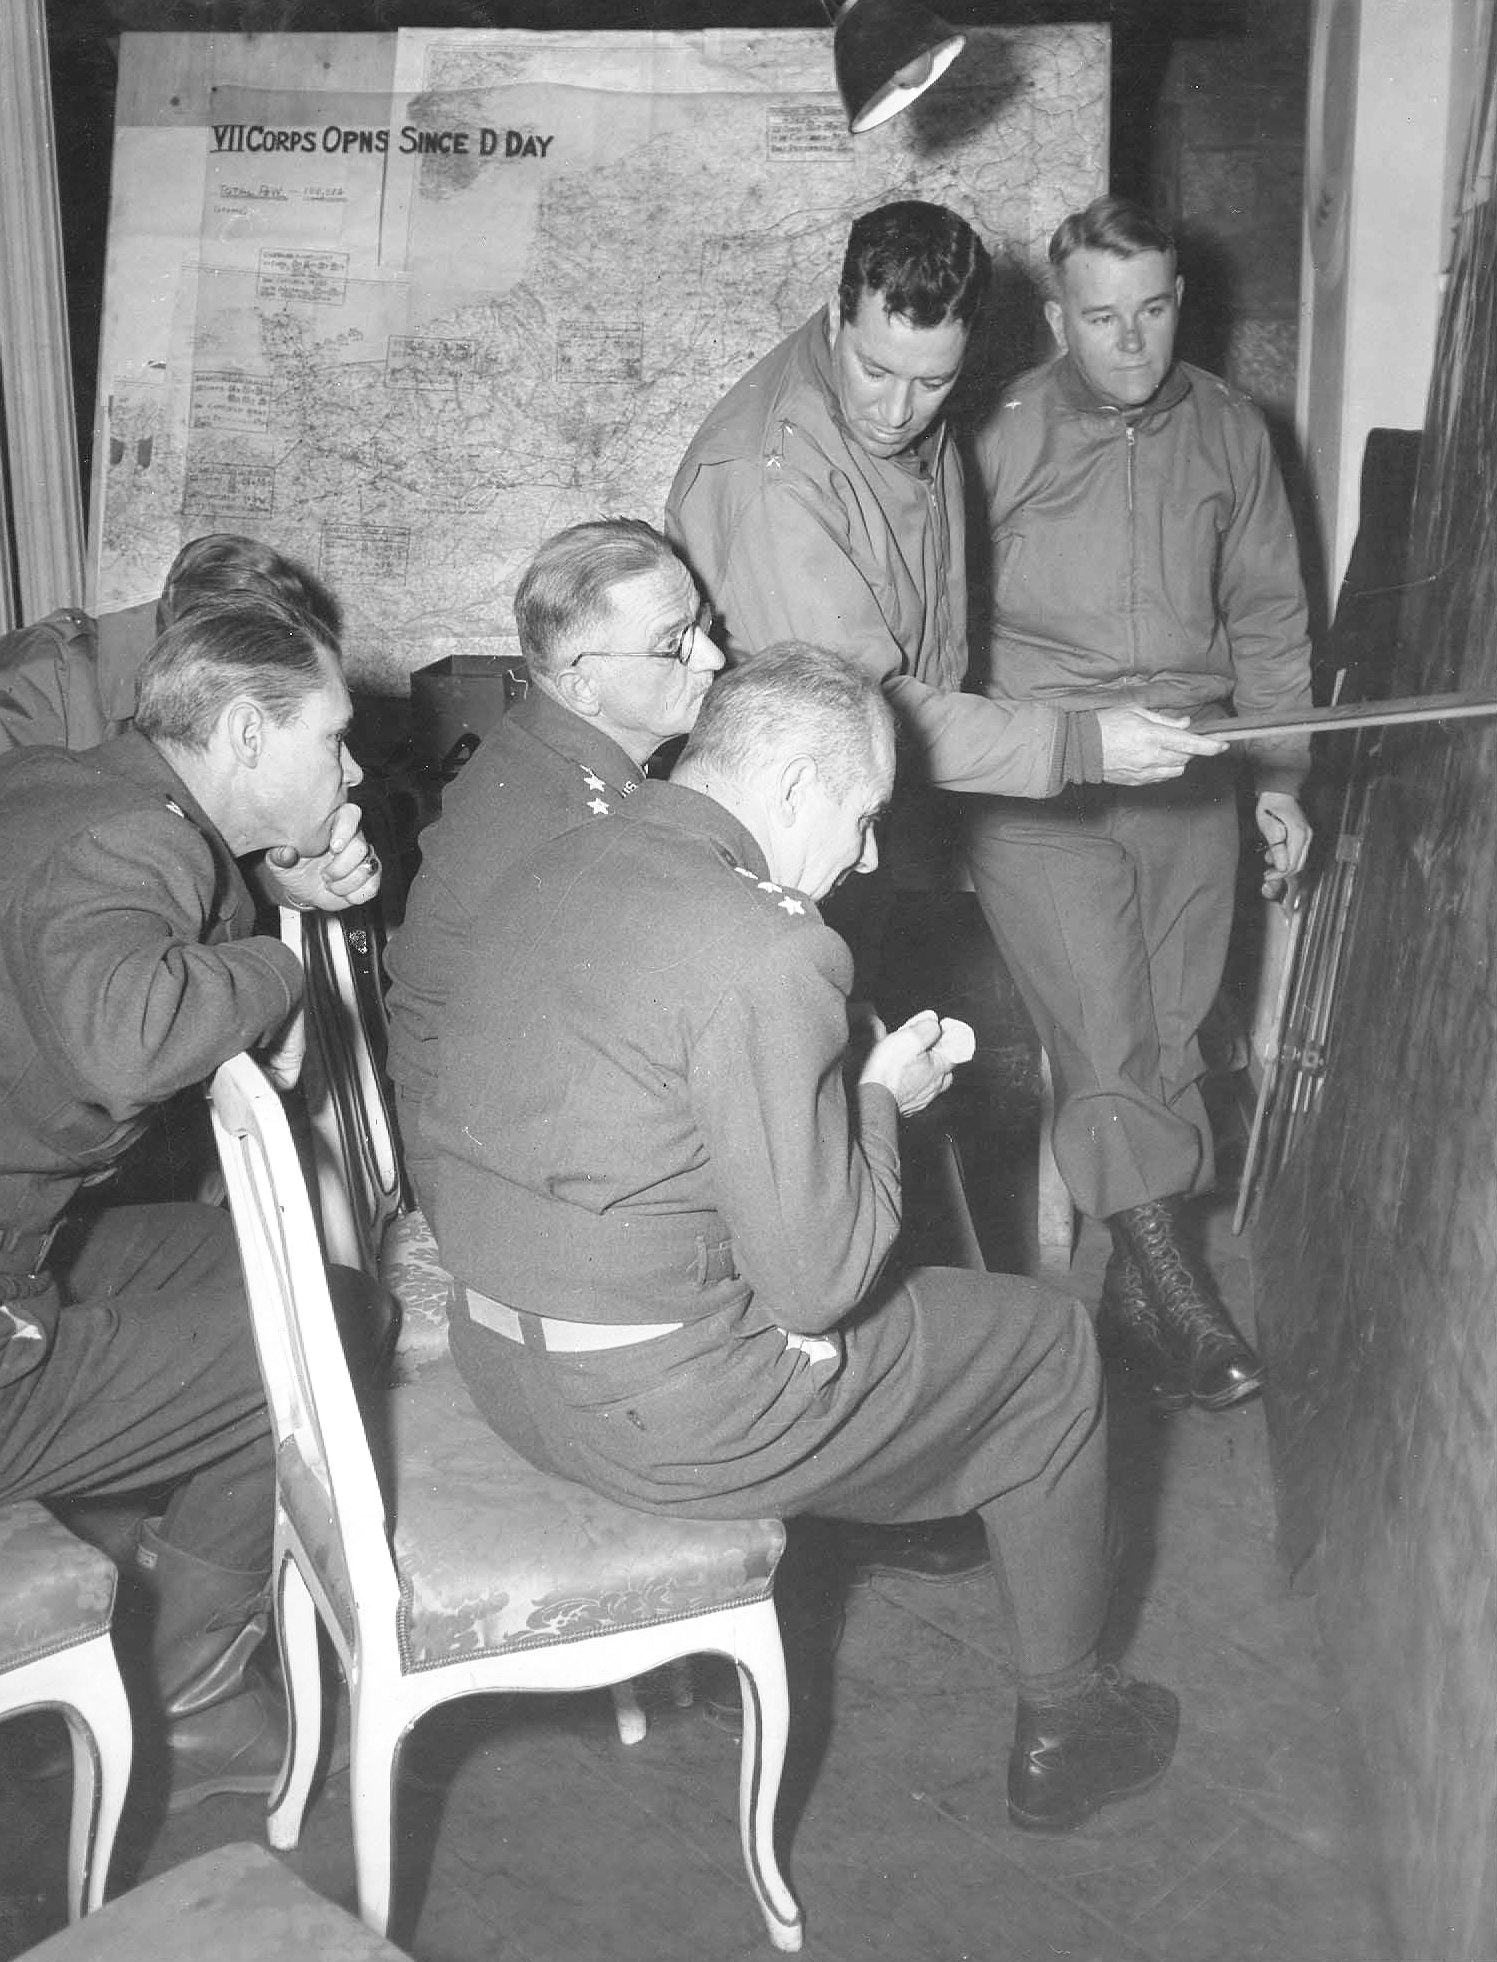 MGen ER “Pete” Quaseda, with pointer, conducting an Air-Ground Liaison briefing for LtGen Carl Spaatz (glasses) and LtGen James Doolittle (seated), VII Corps Headquarters, Münsterbusch, Germany, 19 Nov 1944